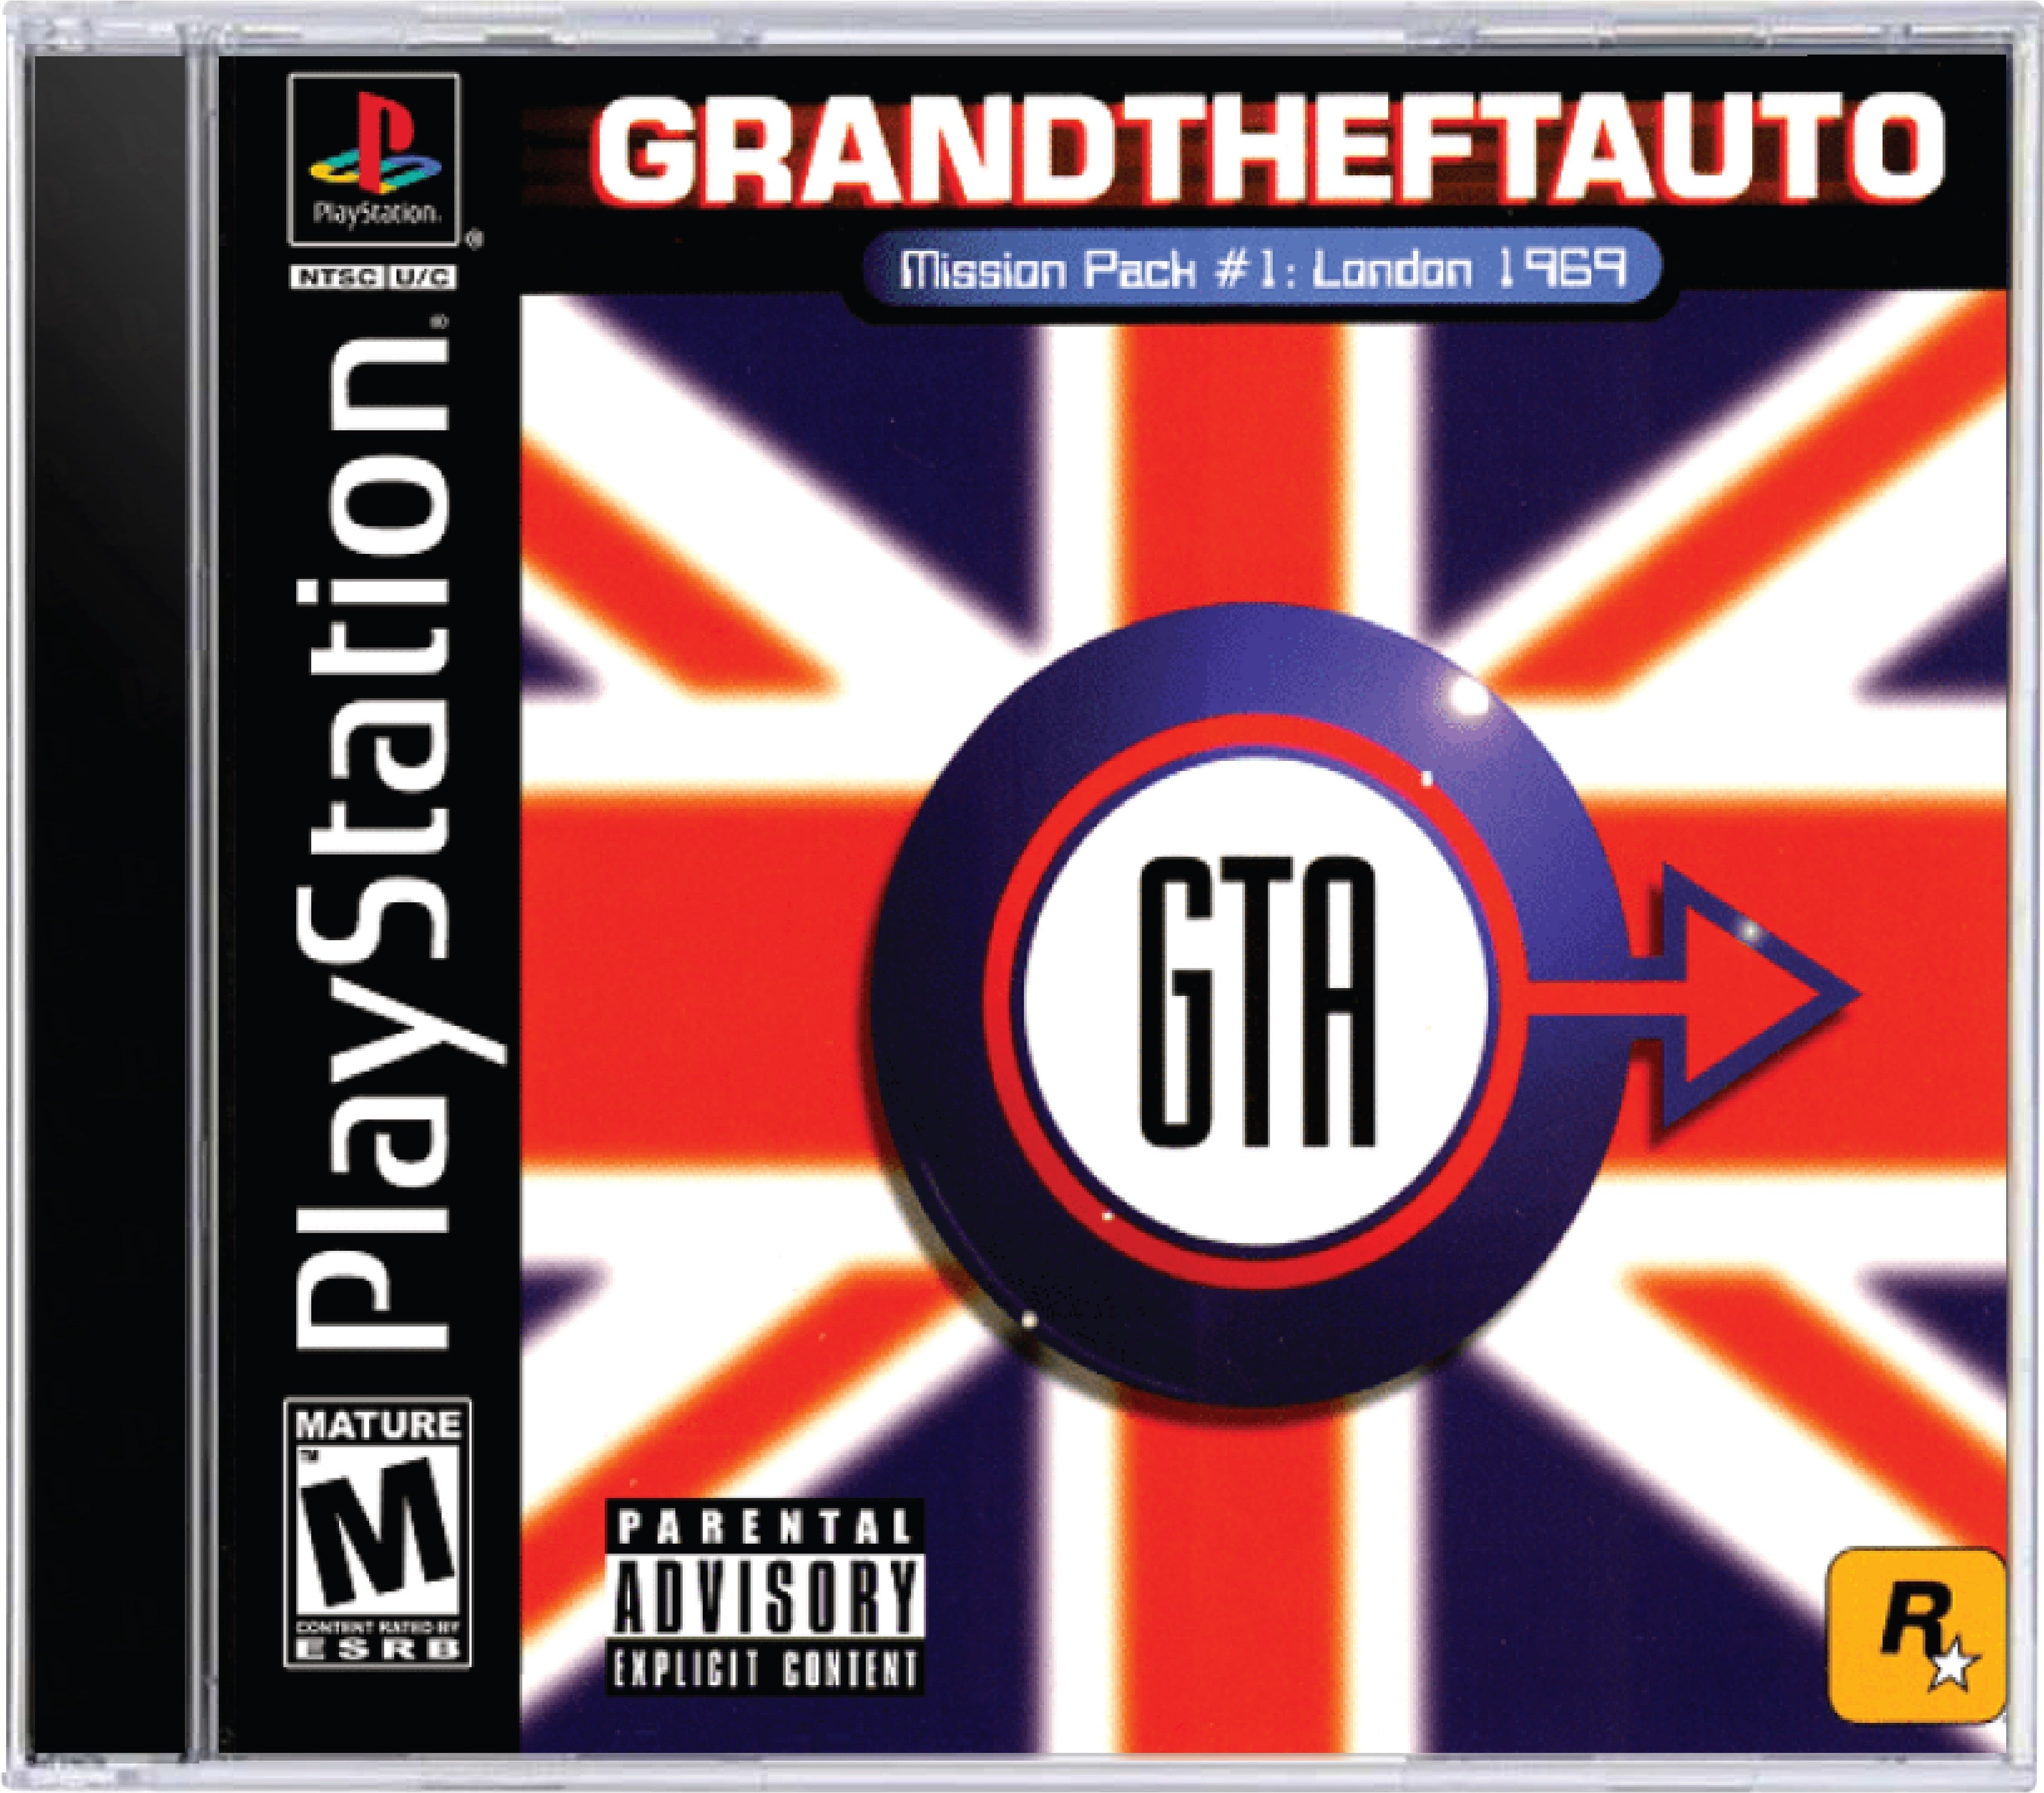 Grand Theft Auto GTA Mission Pack #1 London Cover Art and Product Photo